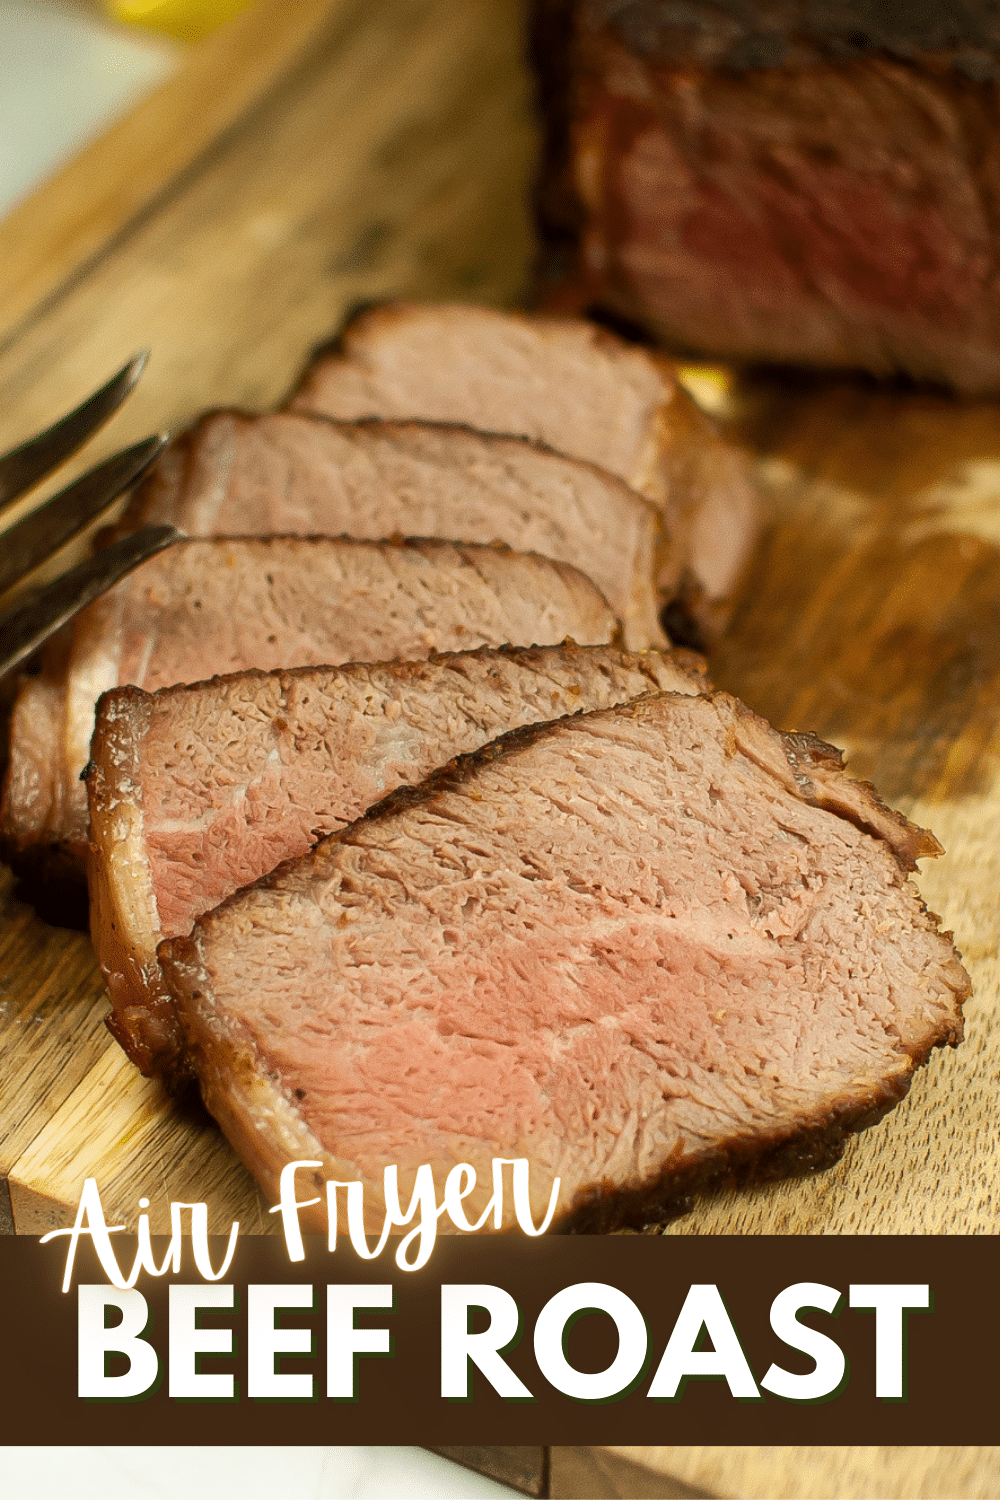 Air Fryer Beef Roast is a delicious and healthy way to enjoy a classic comfort food. This dish is perfect for busy weeknight meals! #airfryerbeefroast #airfryer #airfryerroastbeef #roast #airfryerrecipe via @wondermomwannab